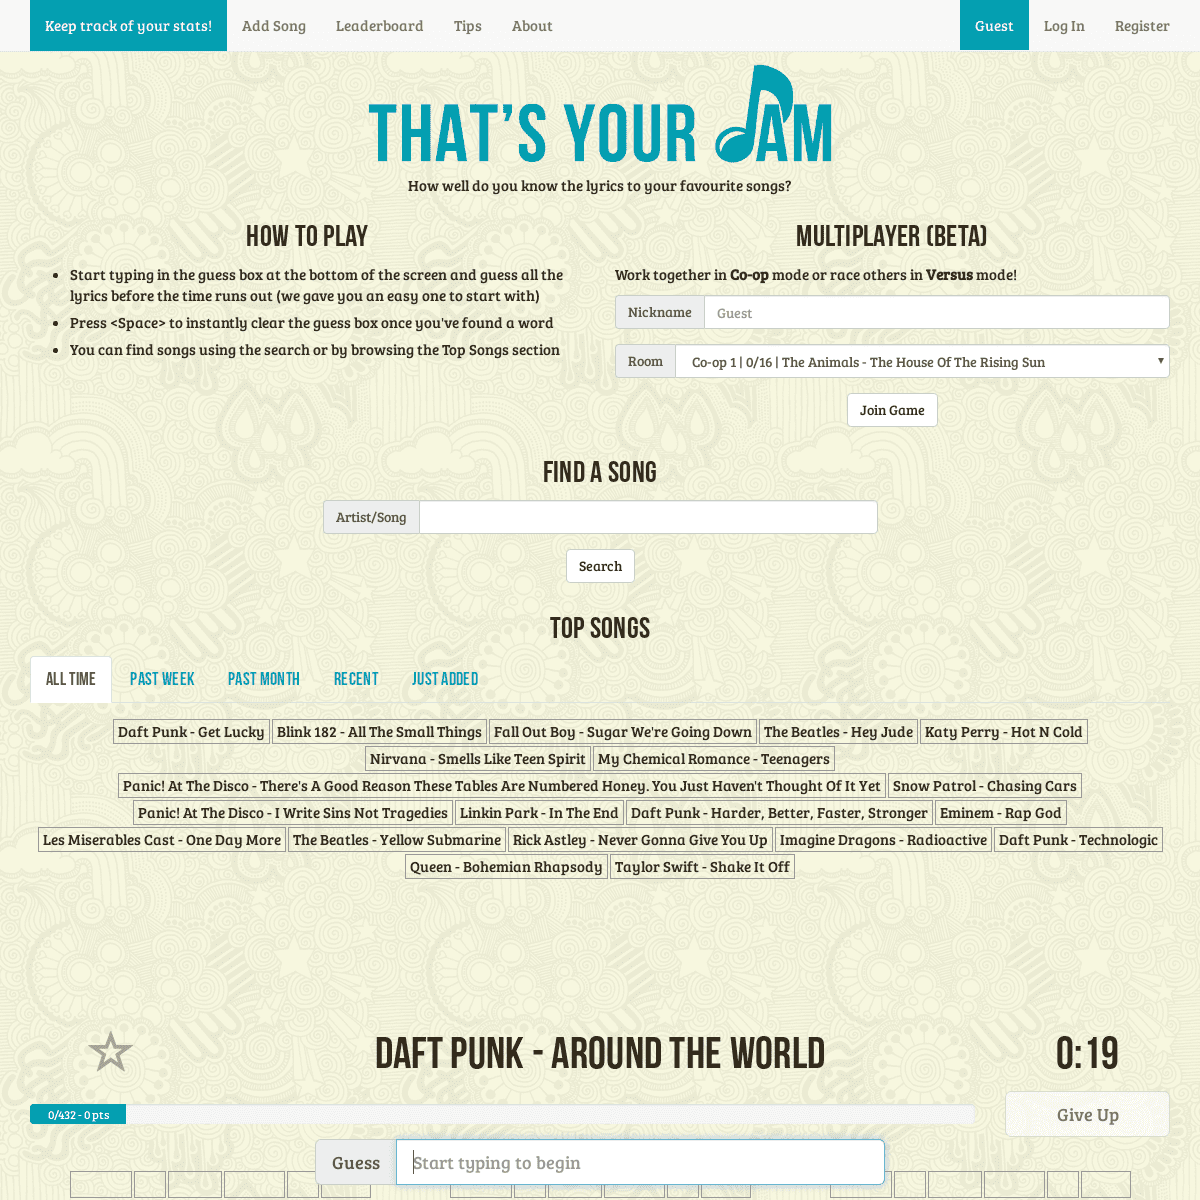 A complete backup of thatsyourjam.com